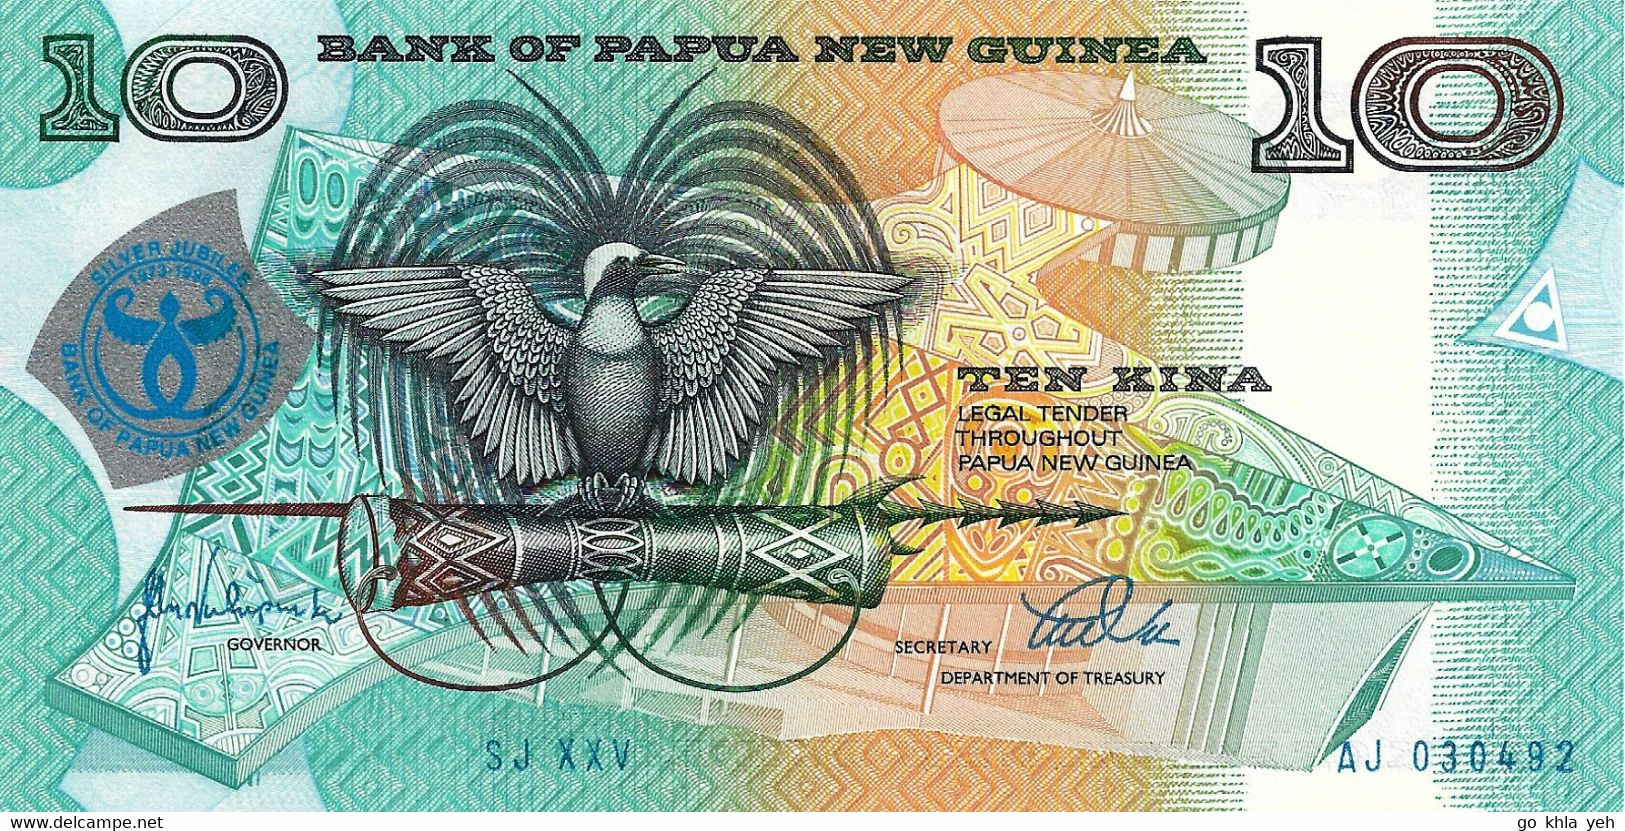 PAPOUASIE - NOUVELLE-GUINEE 1998 10 Kina - P.17a Neuf UNC - Papua New Guinea